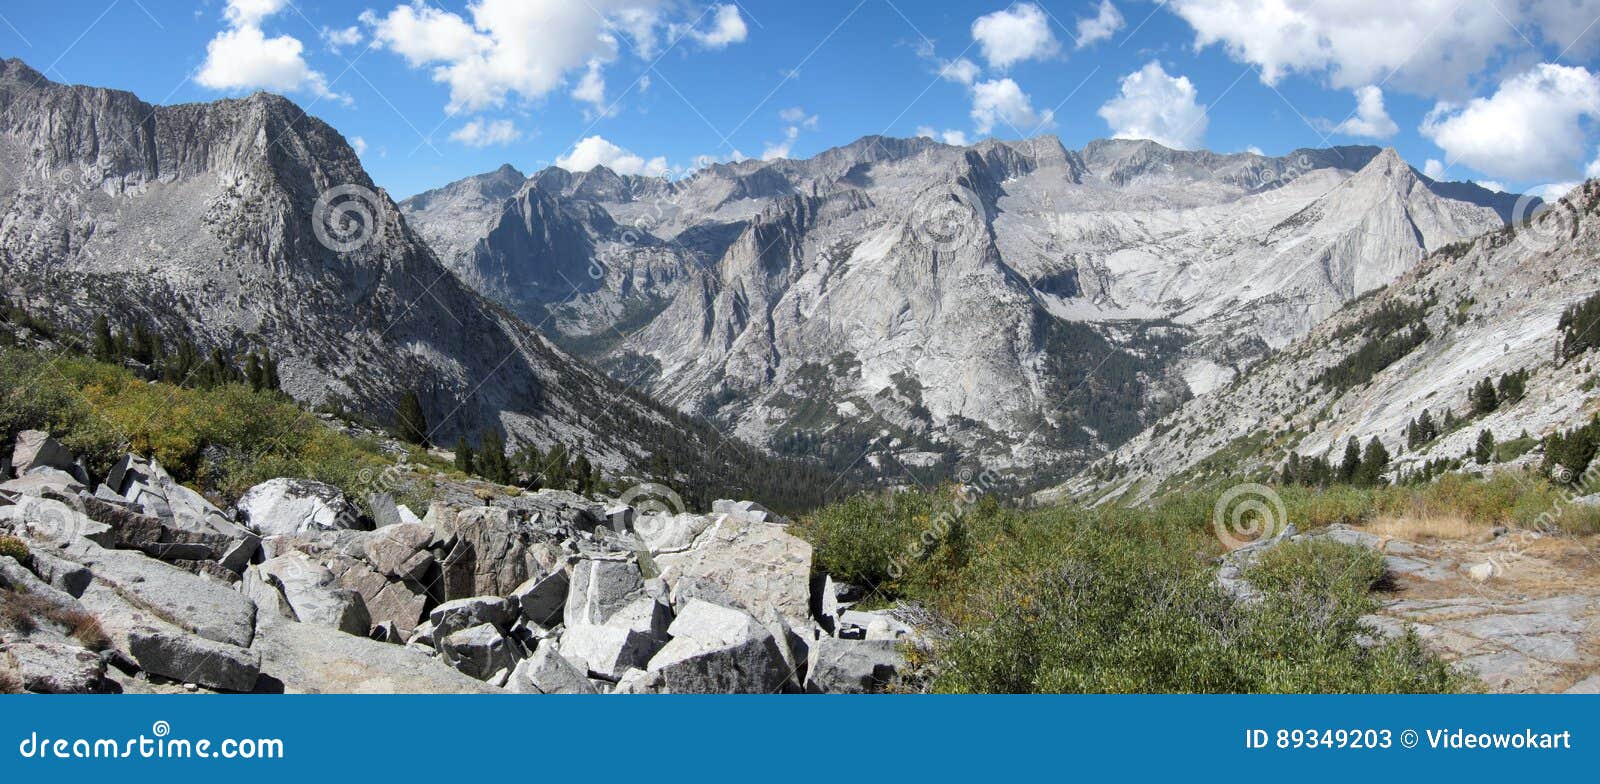 john muir and pacific crest trails in kings canyon national park